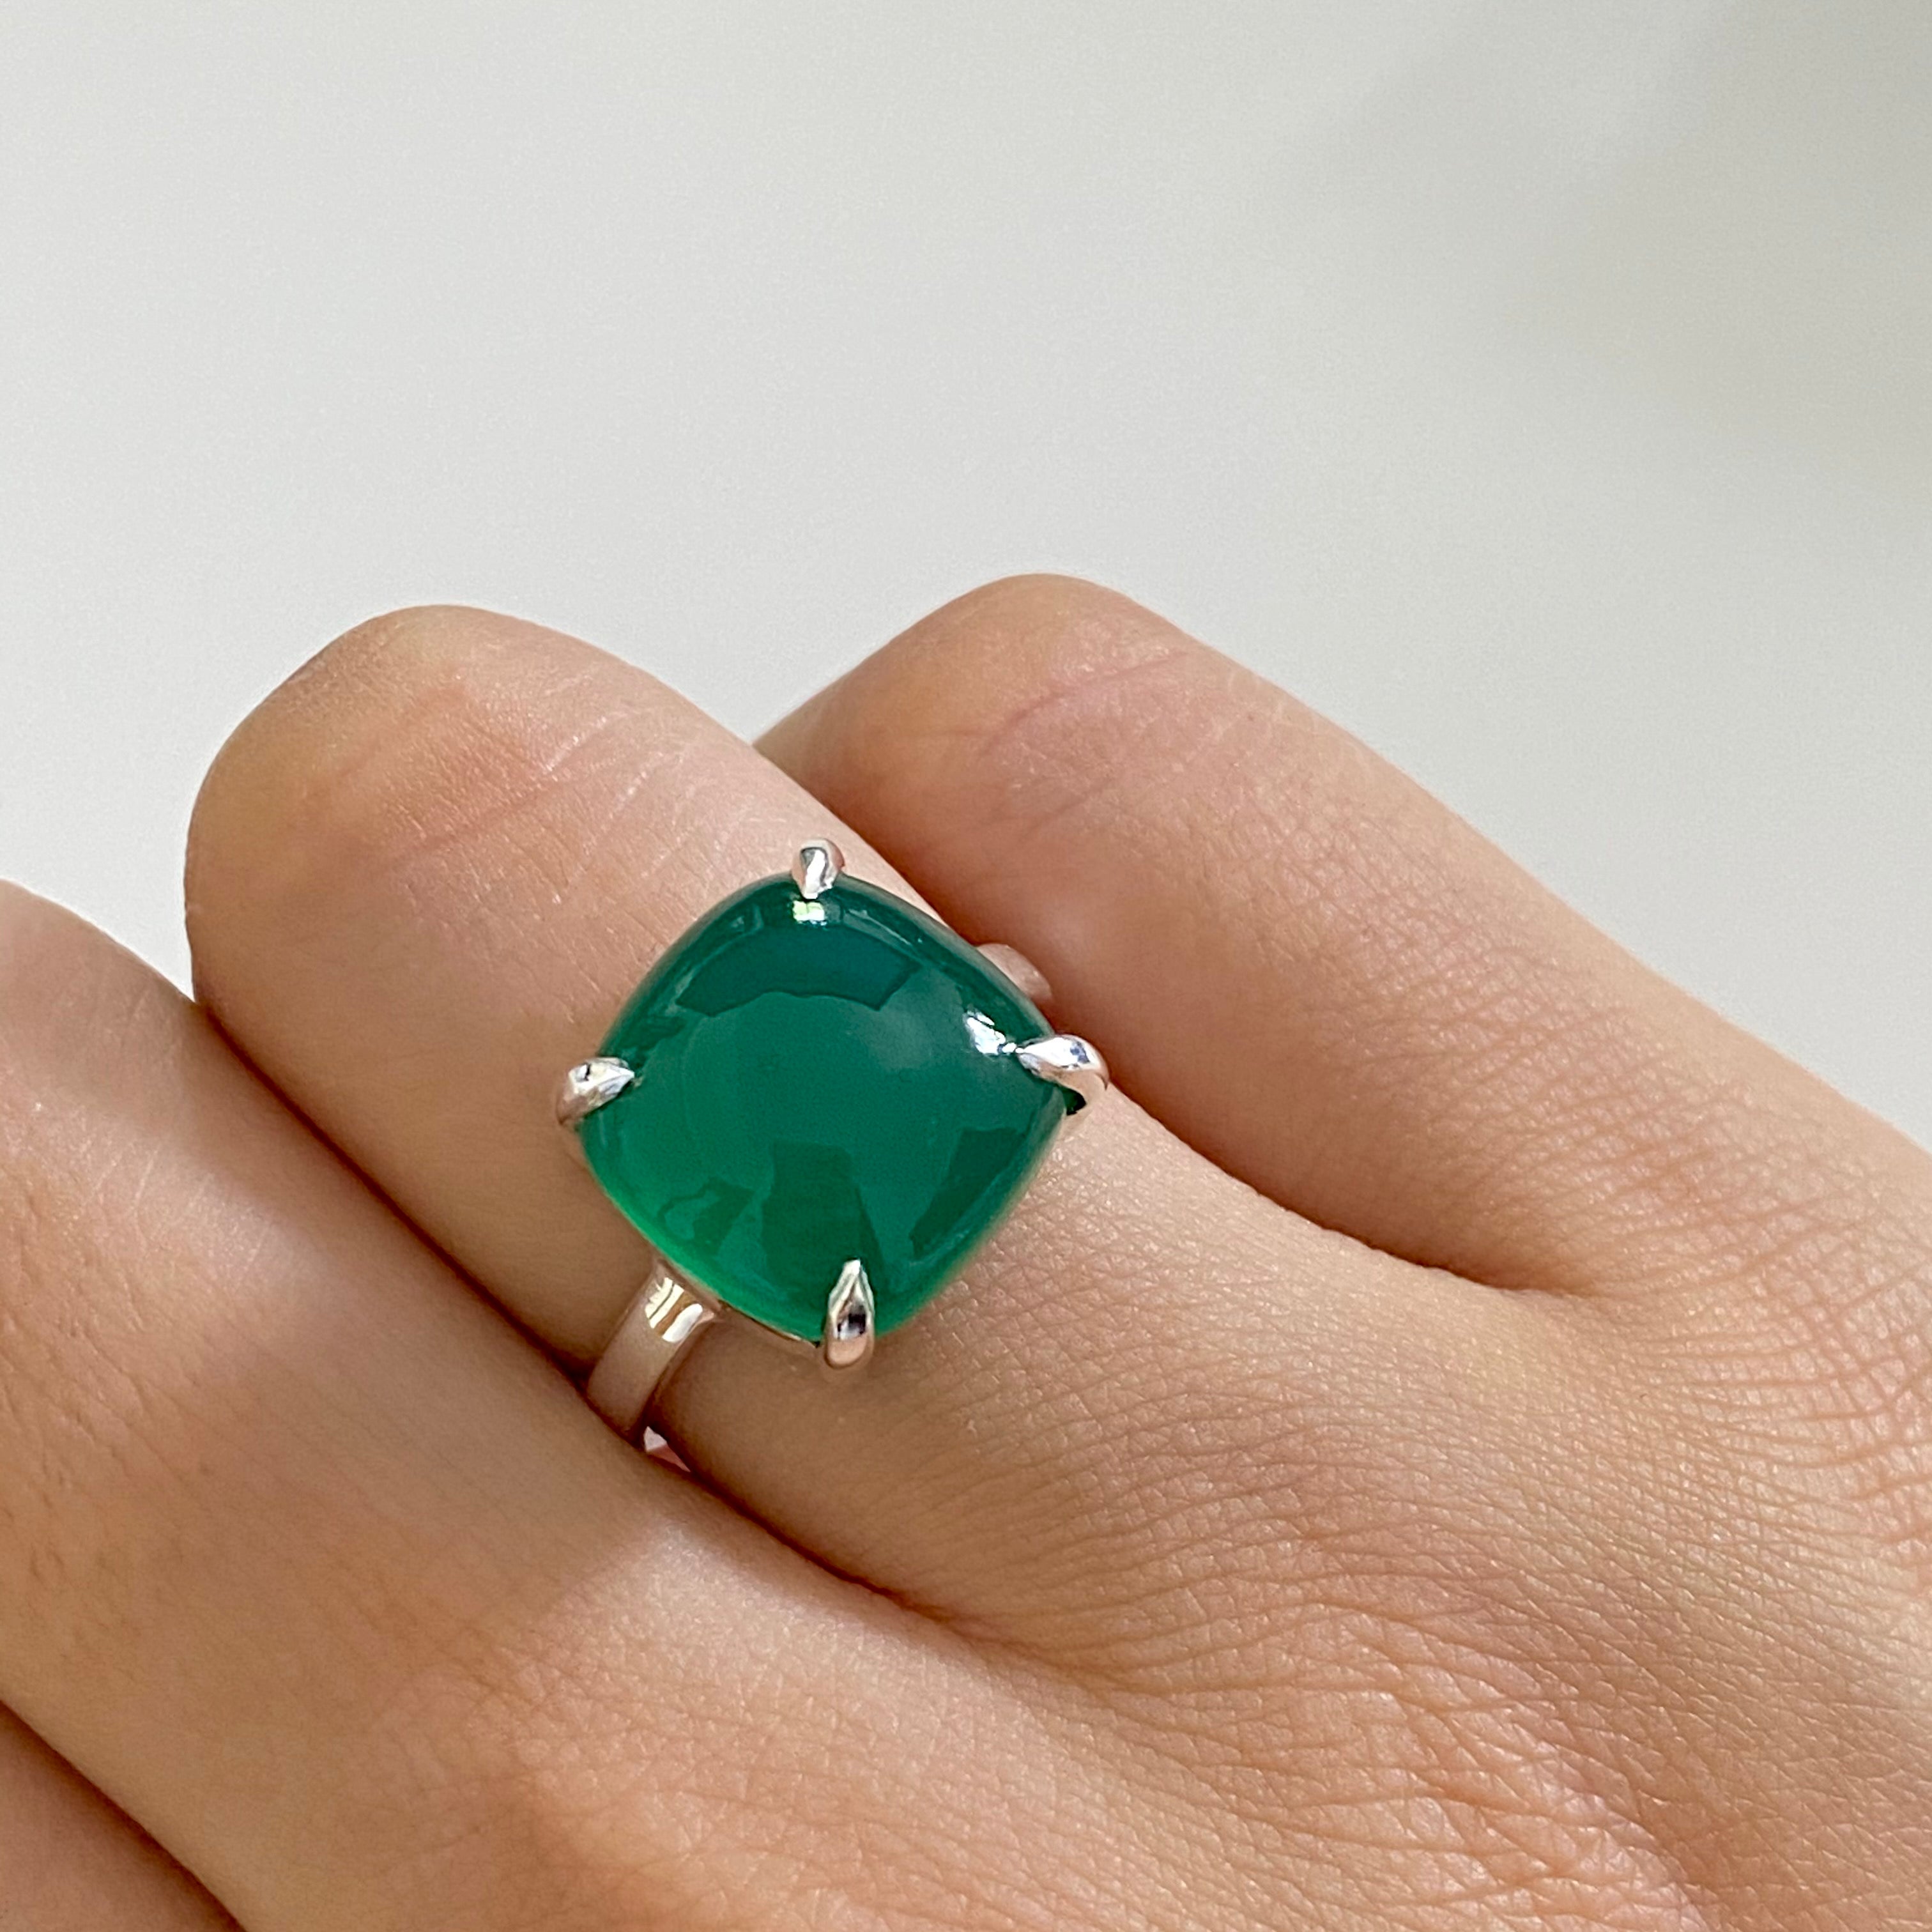 Square Cabochon Green Onyx Ring in Sterling Silver